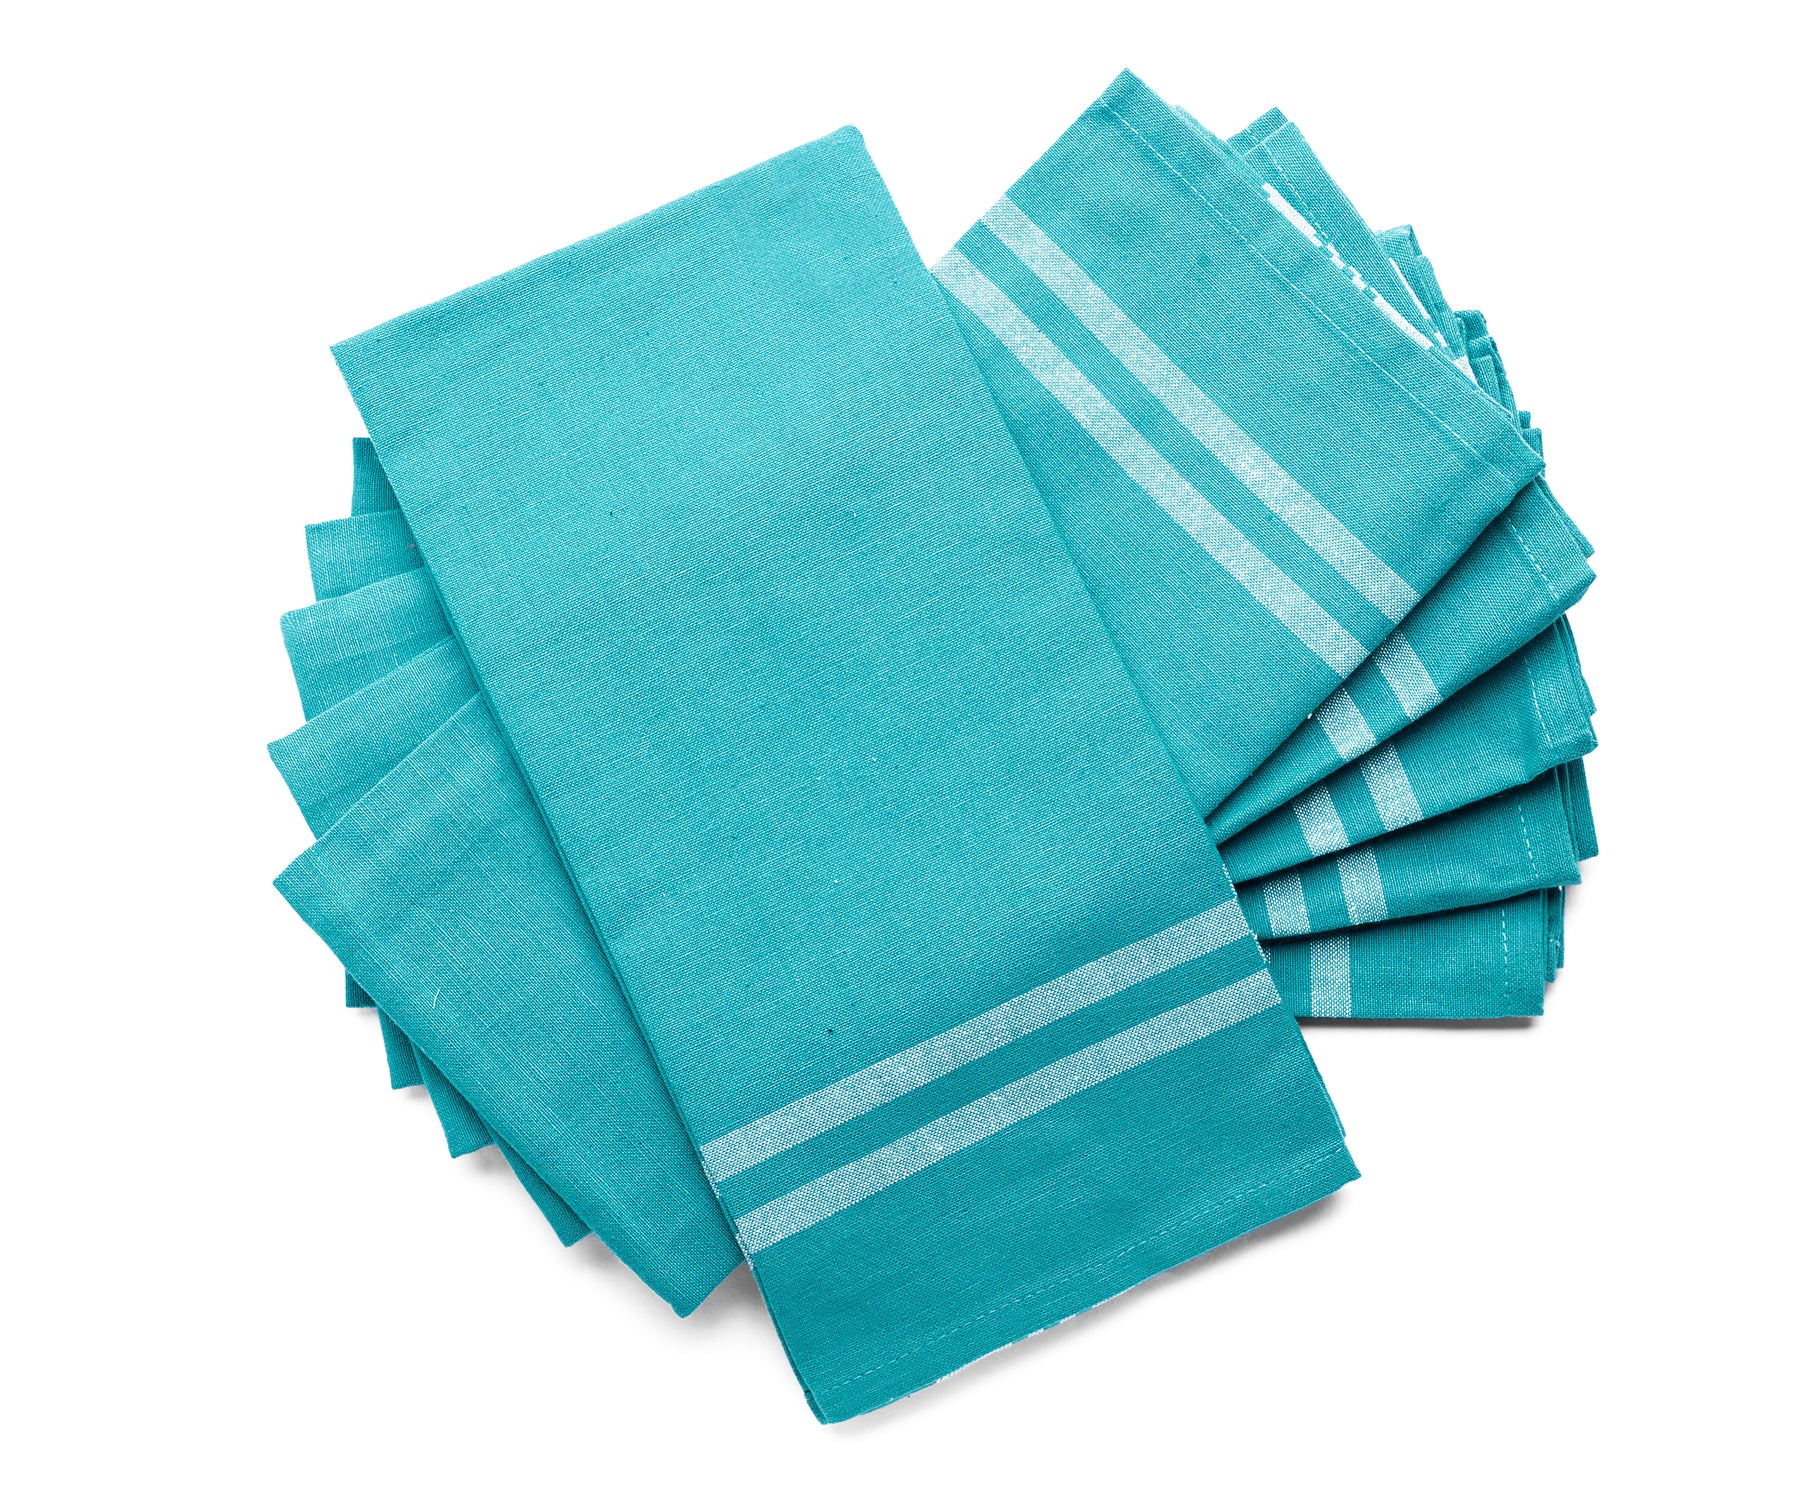 french stripe kitchen towels, teal and white striped kitchen towels, teal dishcloths.